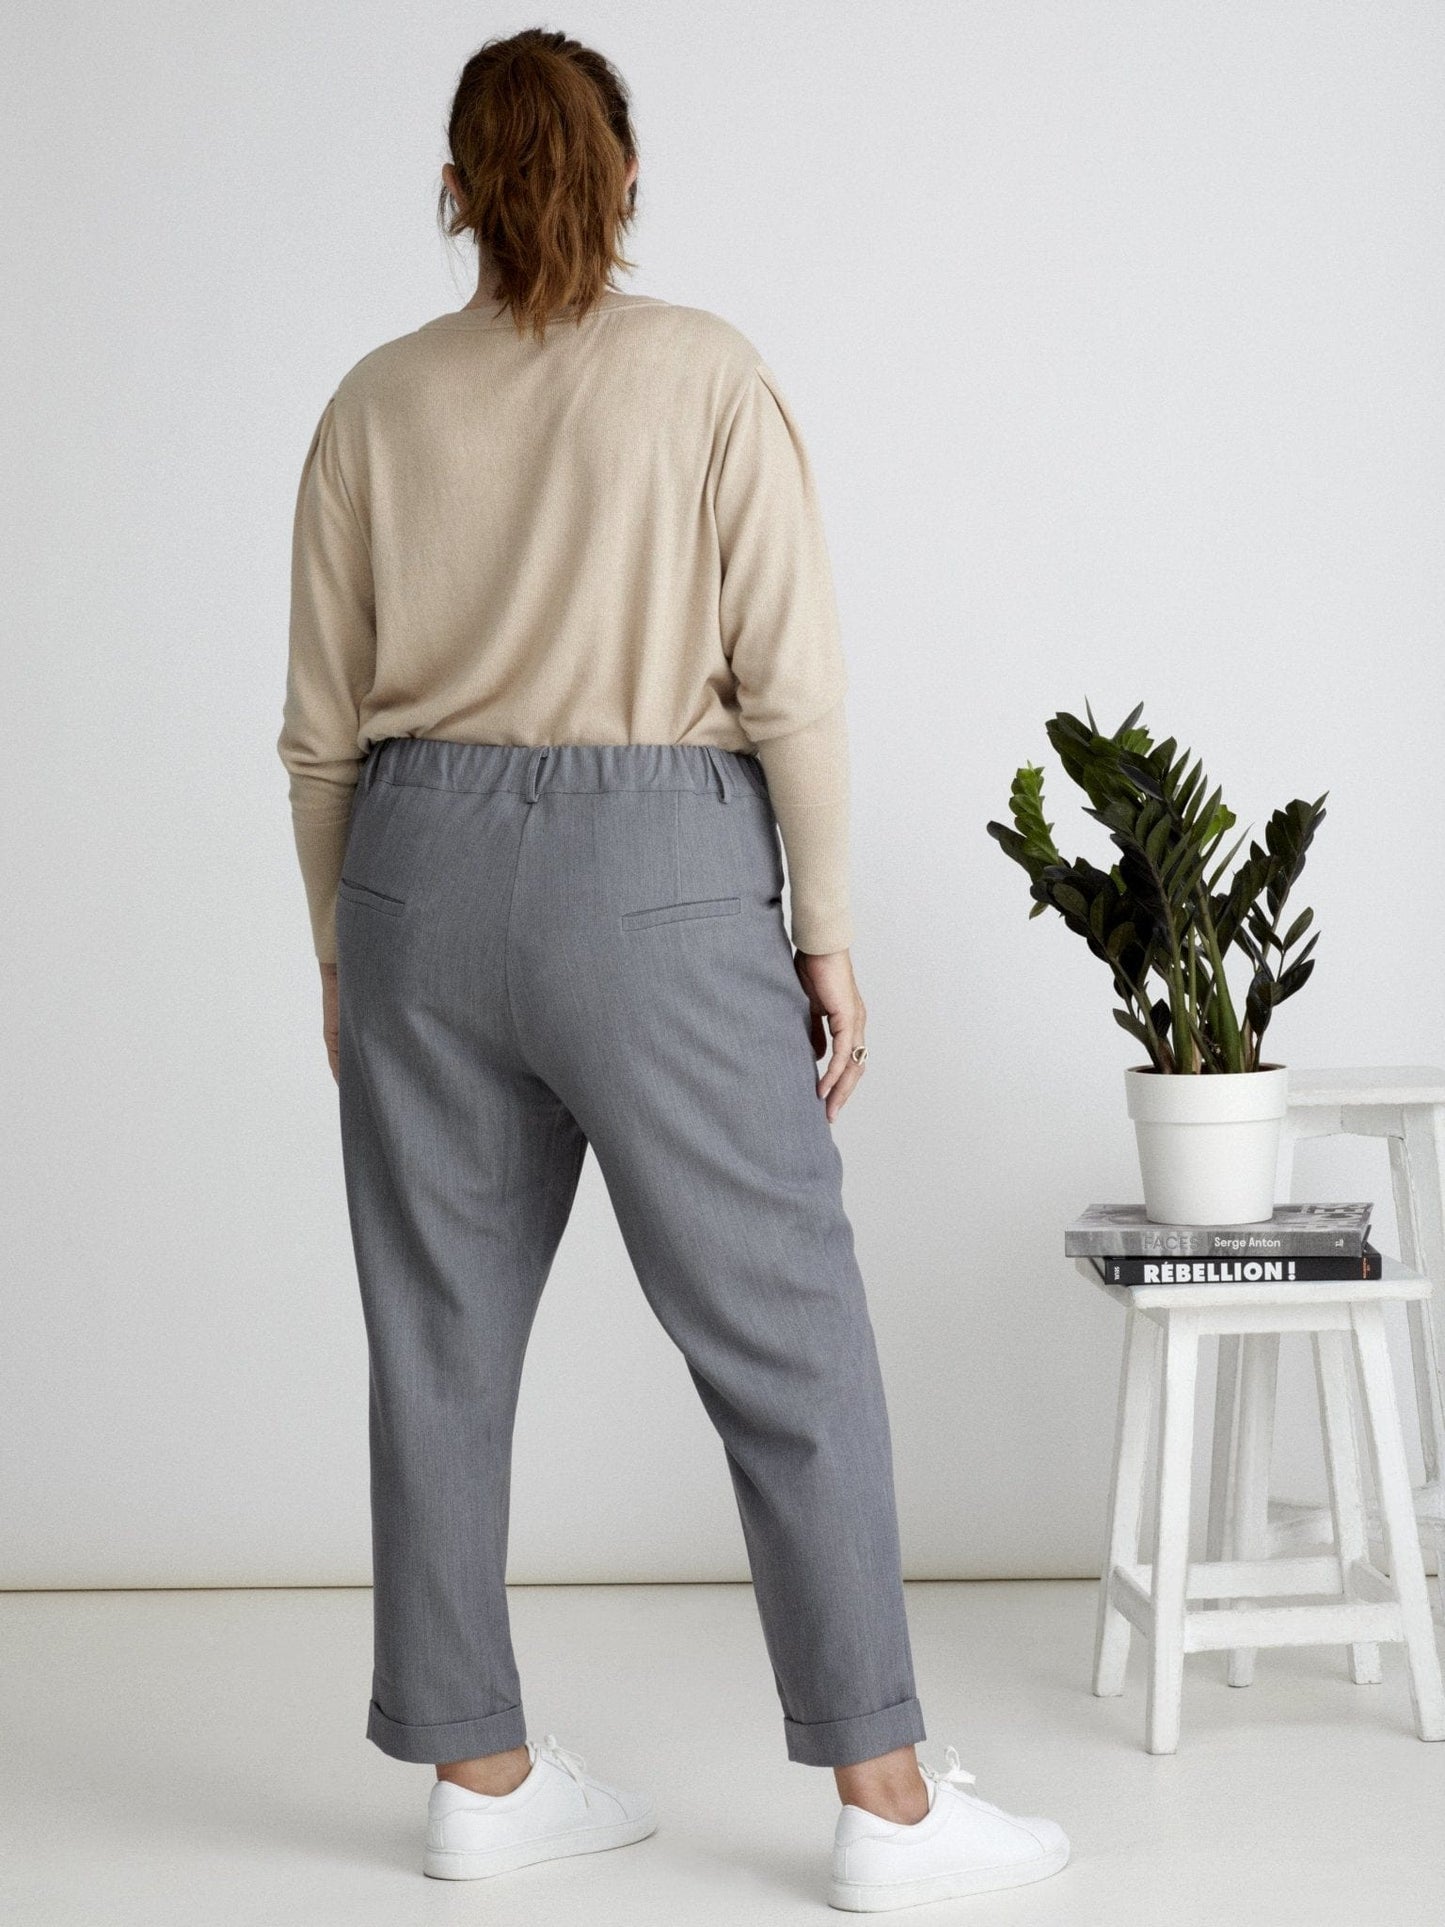 Les Militantes - Maurice 7/8 grey pants large size chic, trendy wide hips quality made in France 